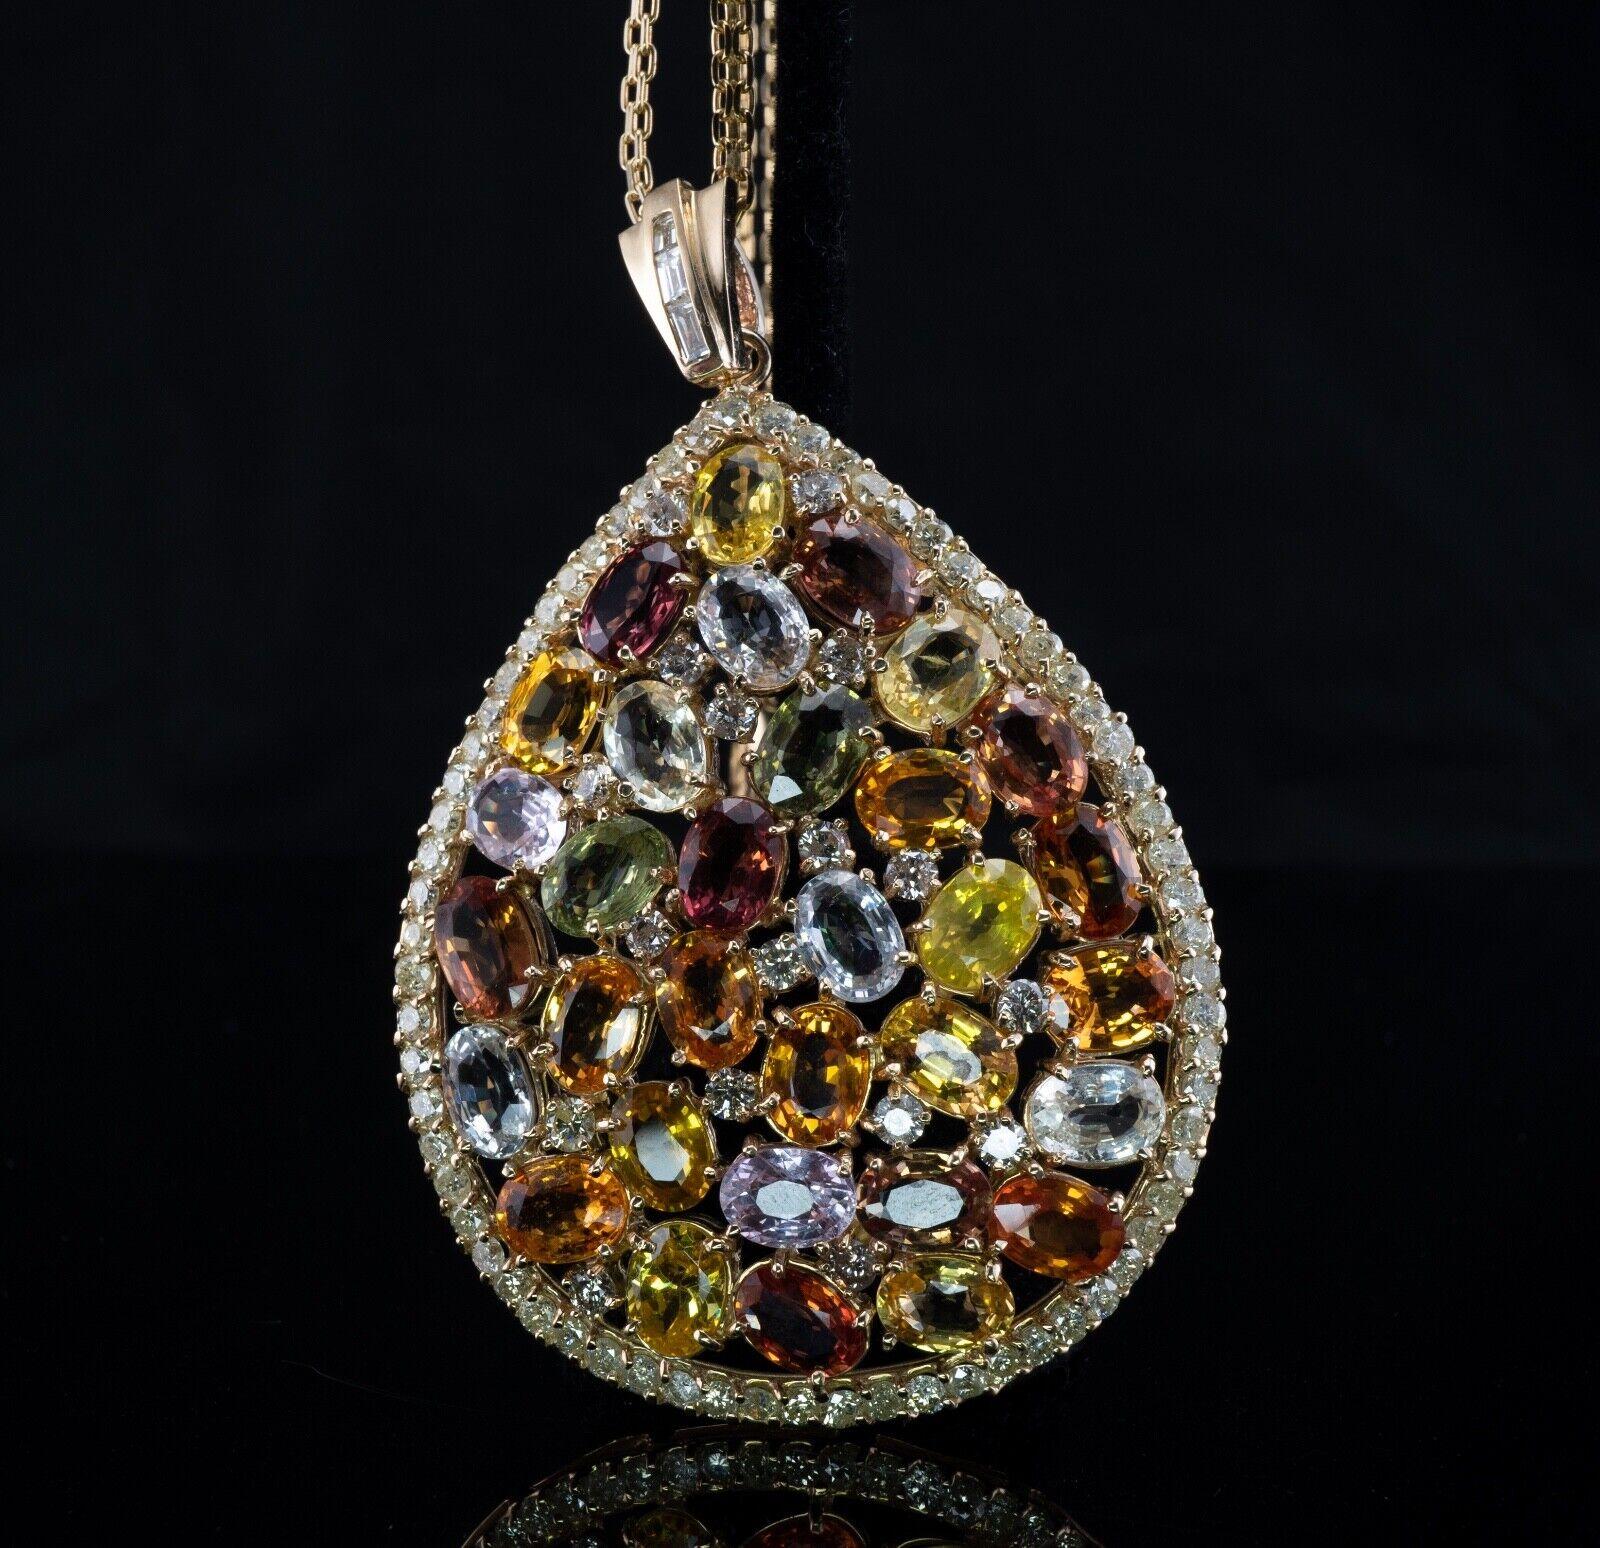 Citrine Quartz Amethyst Peridot Diamond Pendant Necklace 14K Gold Huge

This very different gigantic pendant is crafted in solid 14K Yellow Gold (carefully tested and guaranteed). There are 32 oval cut genuine Earth mined gemstones: Yellow Madeira,